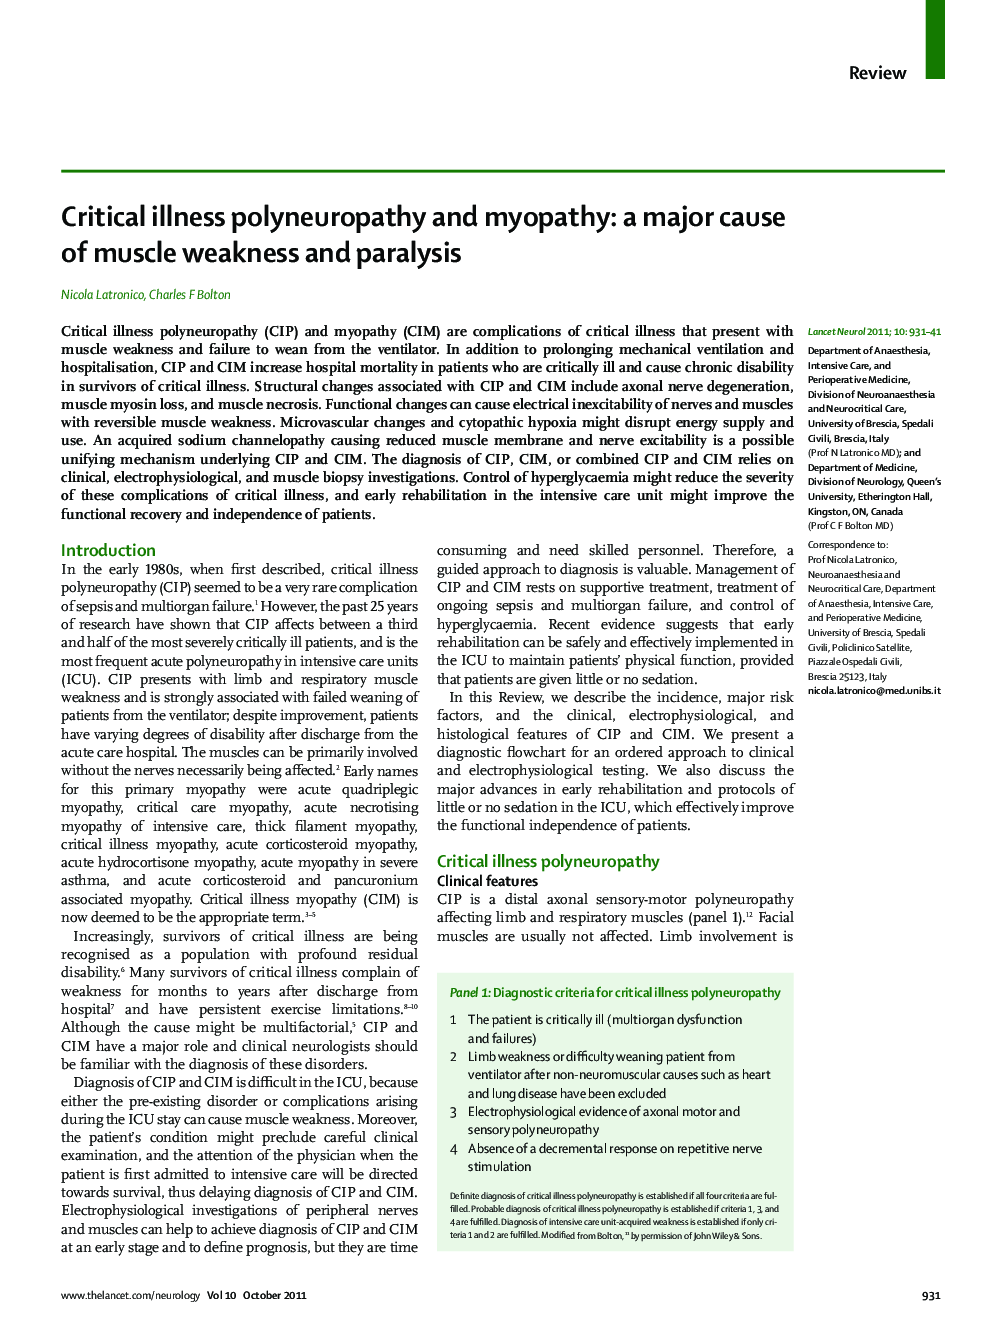 Critical illness polyneuropathy and myopathy: a major cause of muscle weakness and paralysis